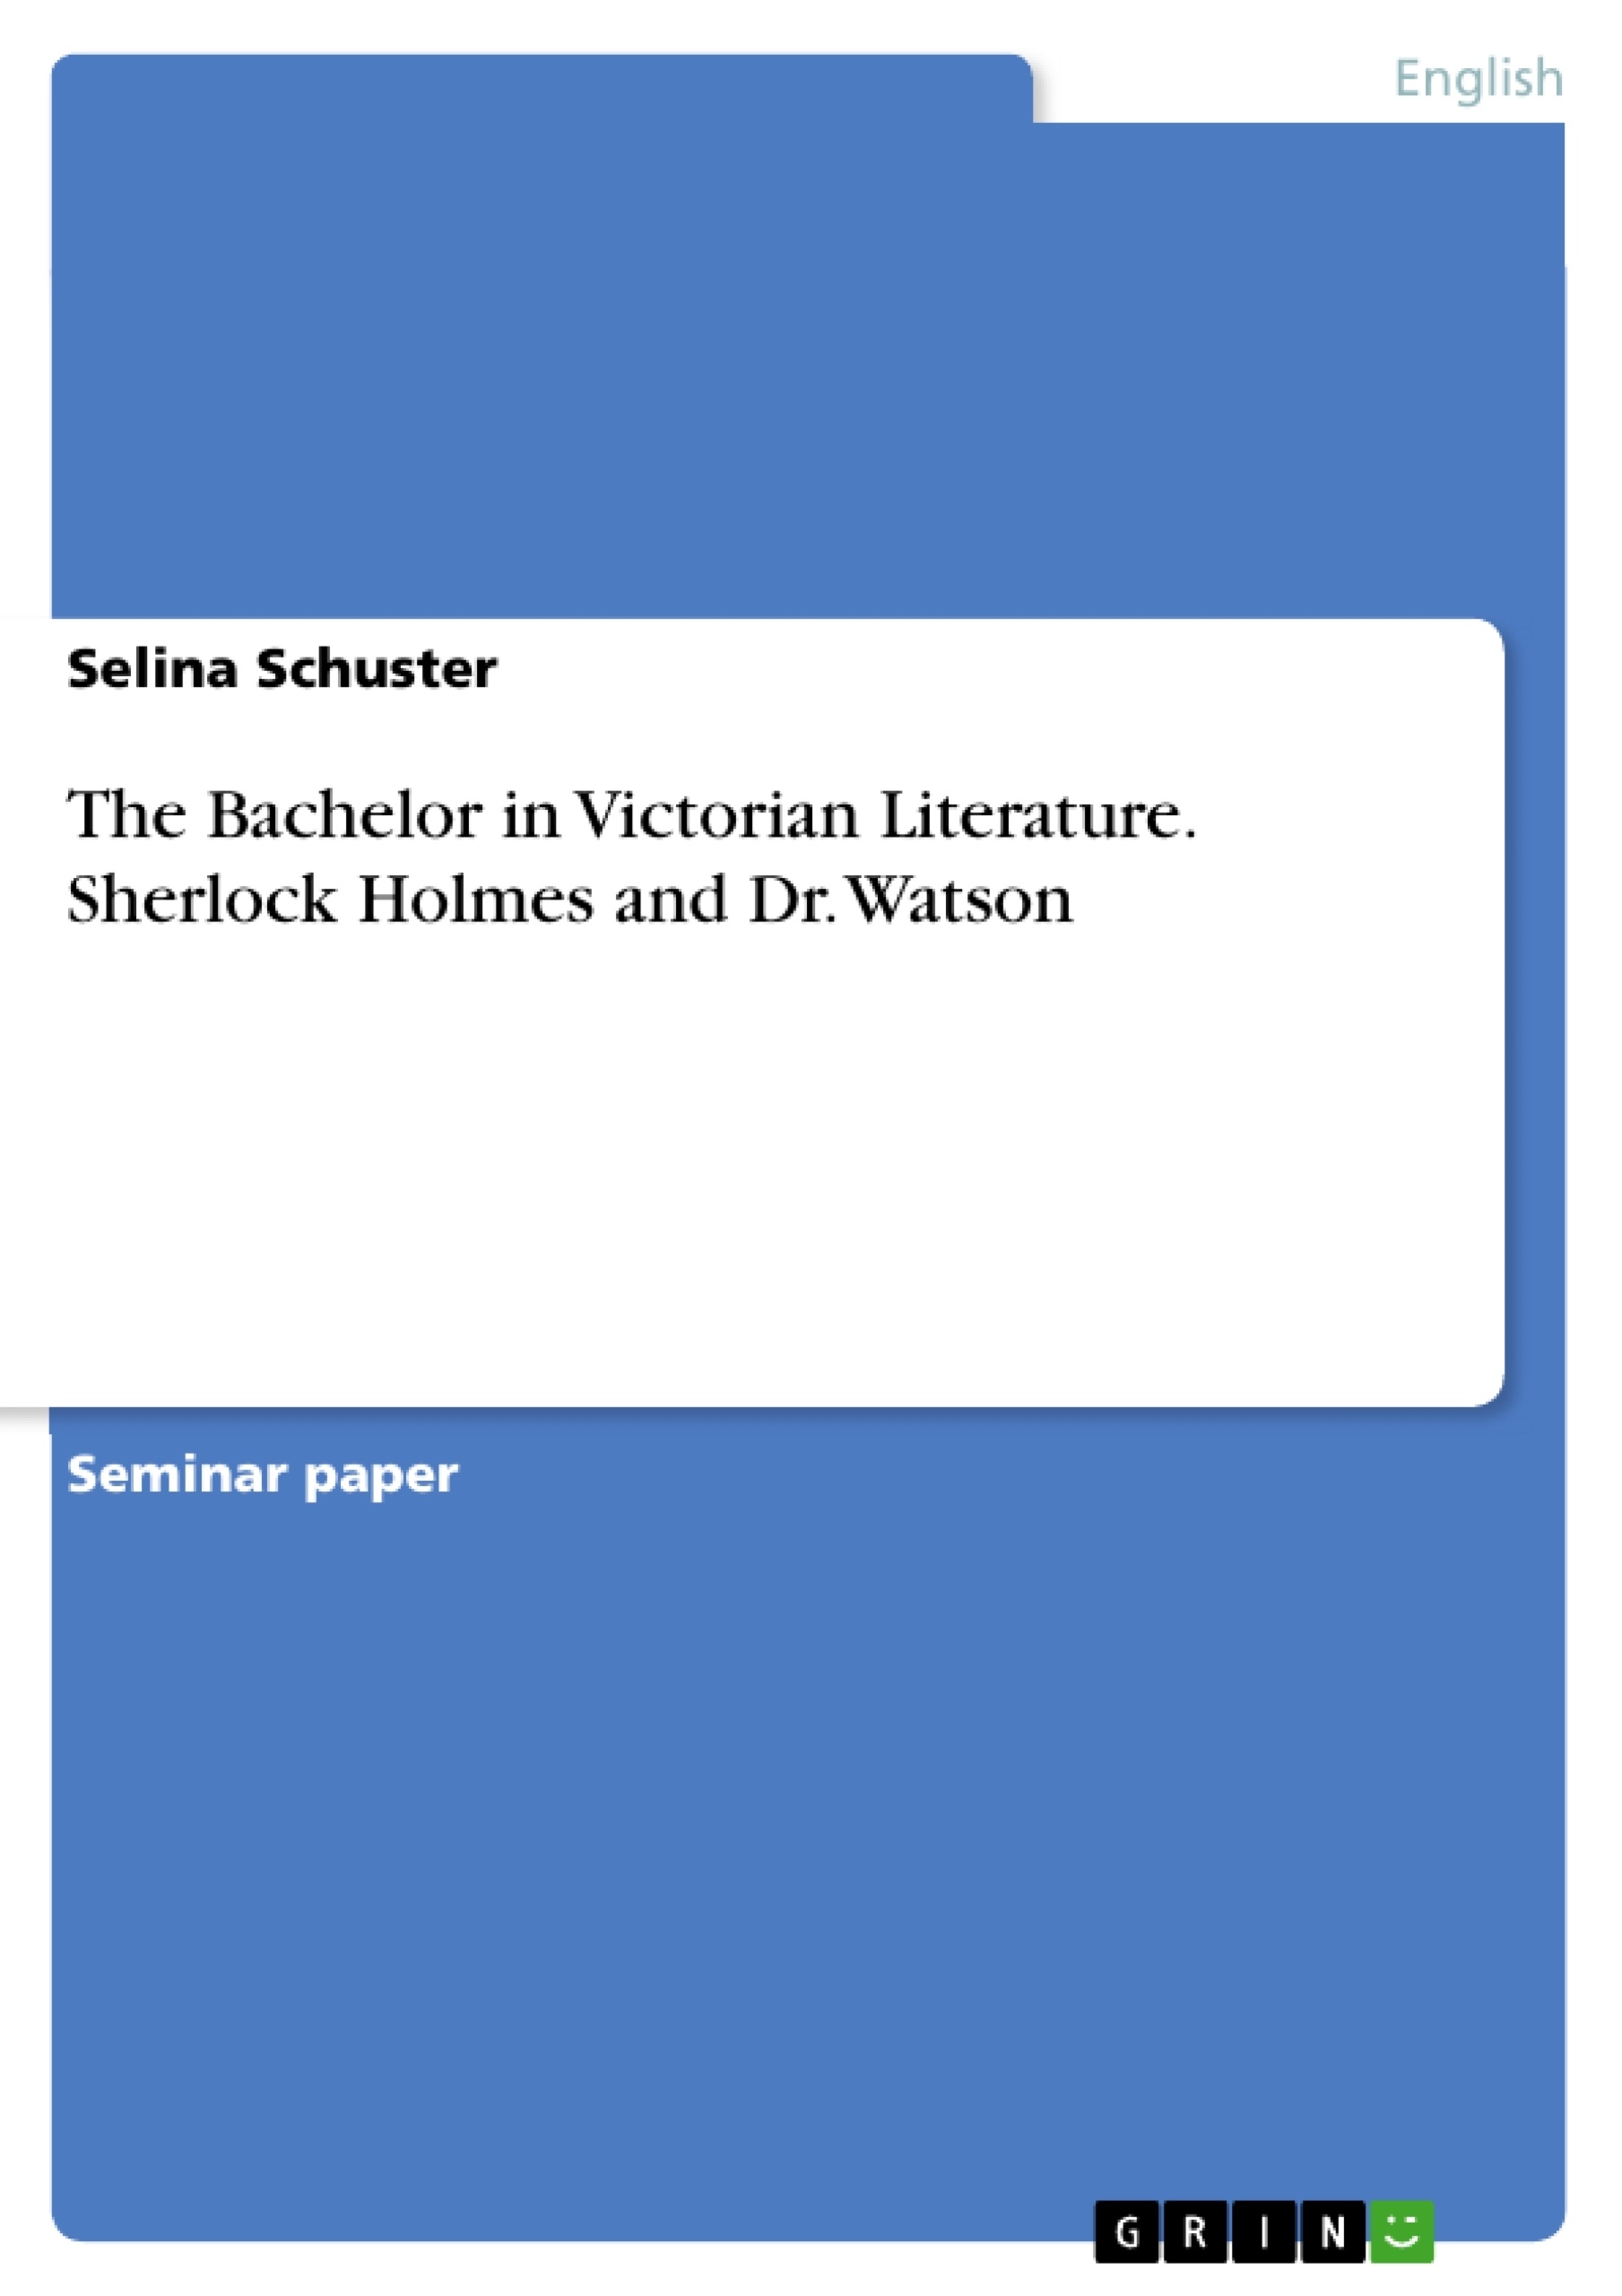 Título: The Bachelor in Victorian Literature. Sherlock Holmes and Dr. Watson